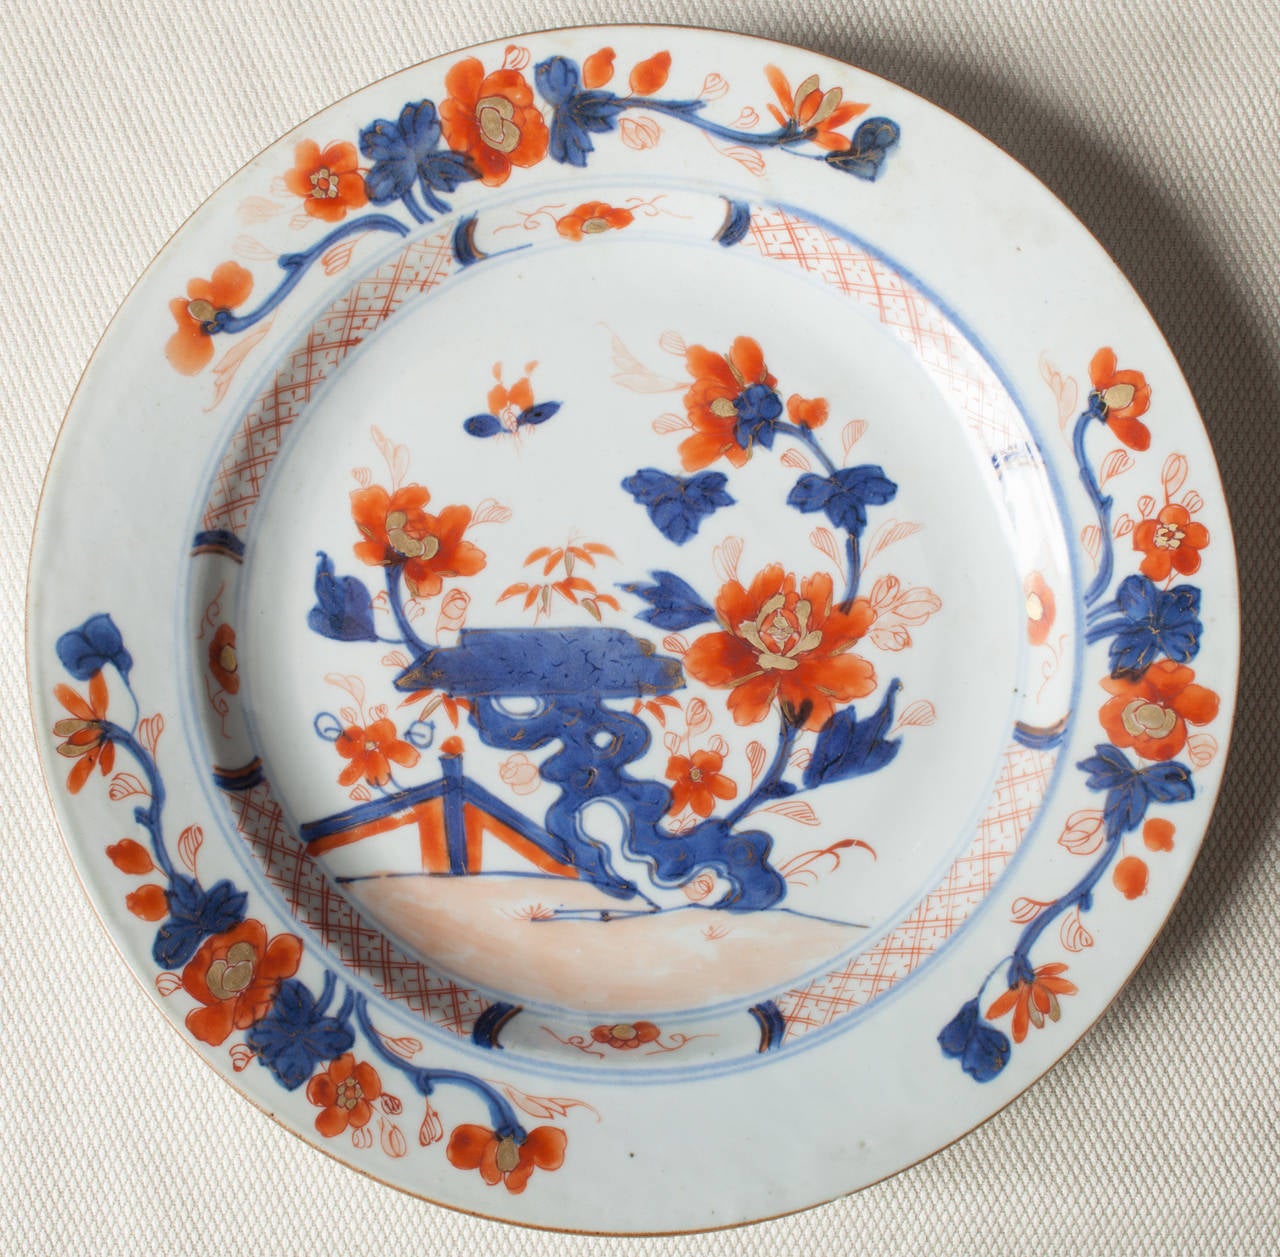 Chinese export porcelain plate in the Chinese Imari style of decoration. The plate is hand painted in an underglaze blue and overpainted in iron red. The diameter is 9